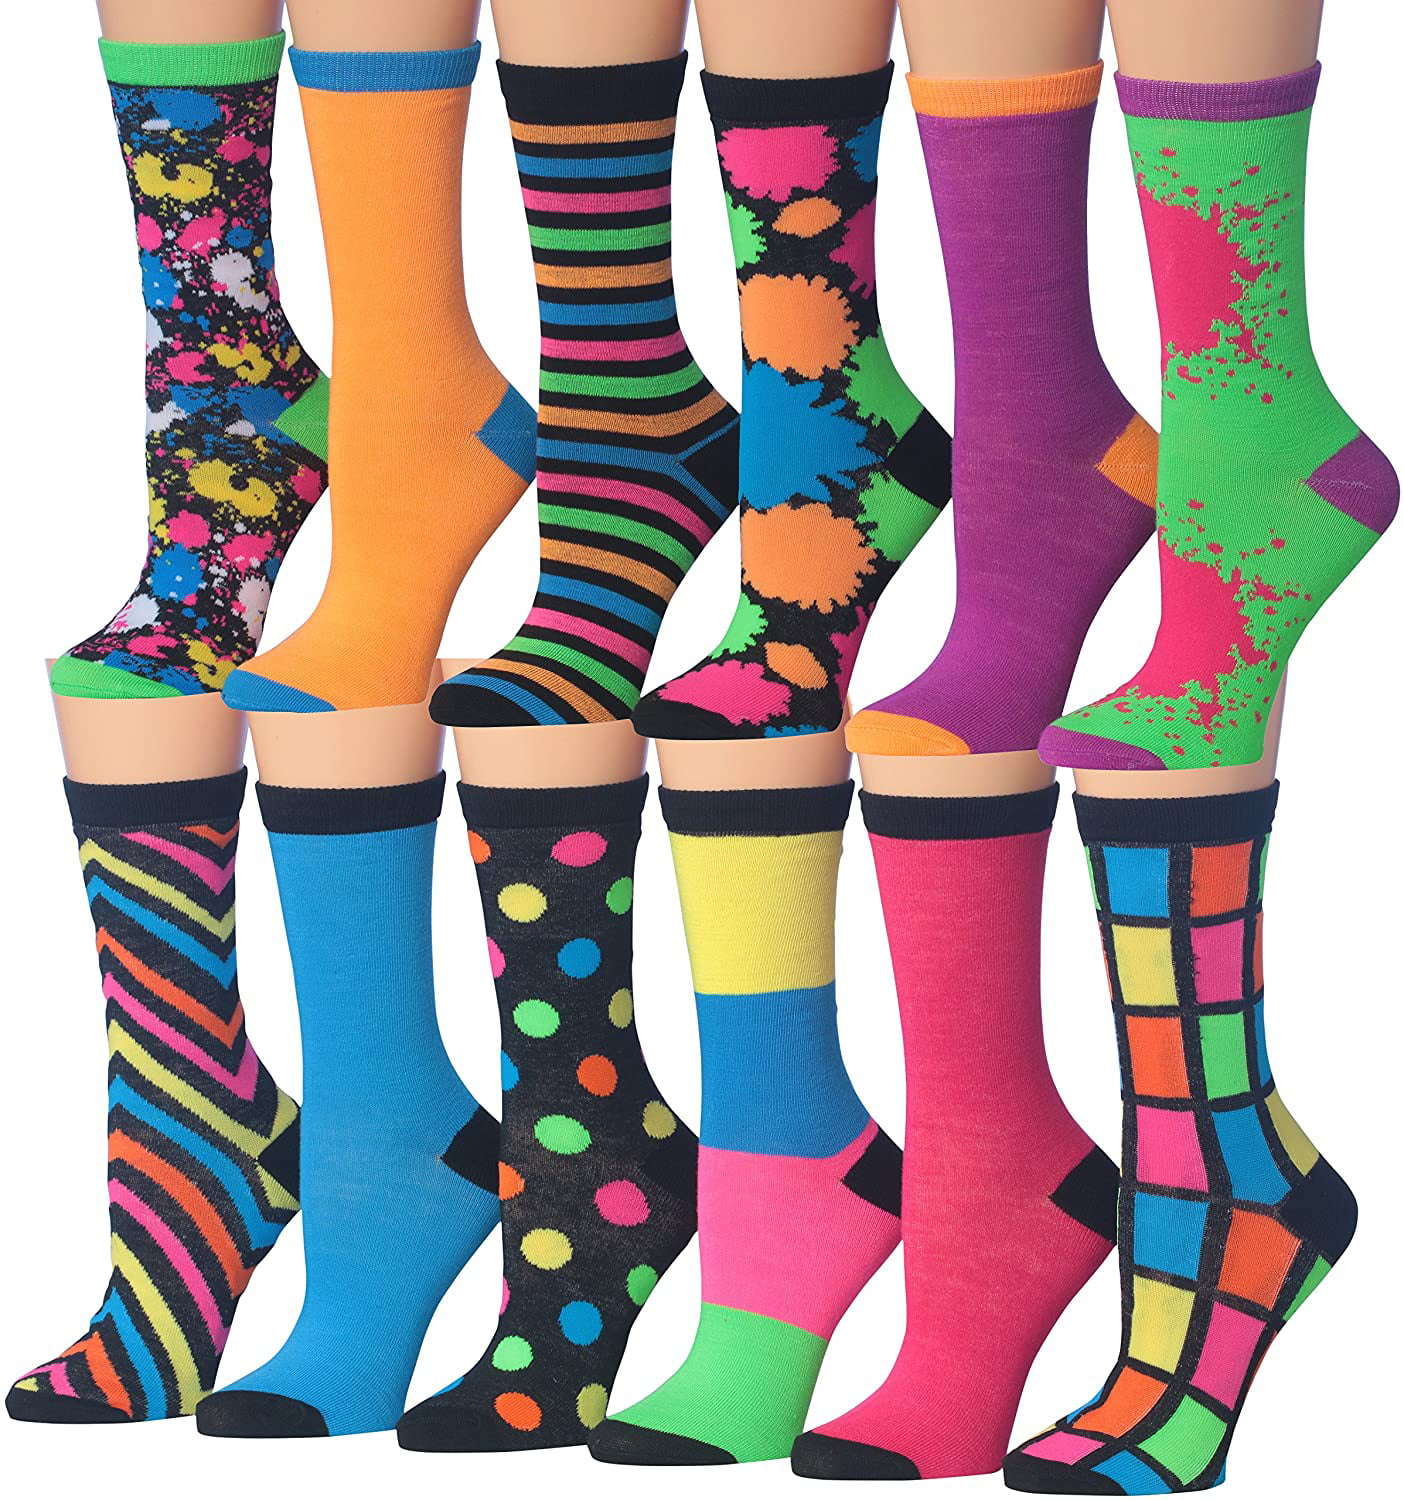 Womens 12 Pairs Colorful Patterned Crew Socks Walmart Canada